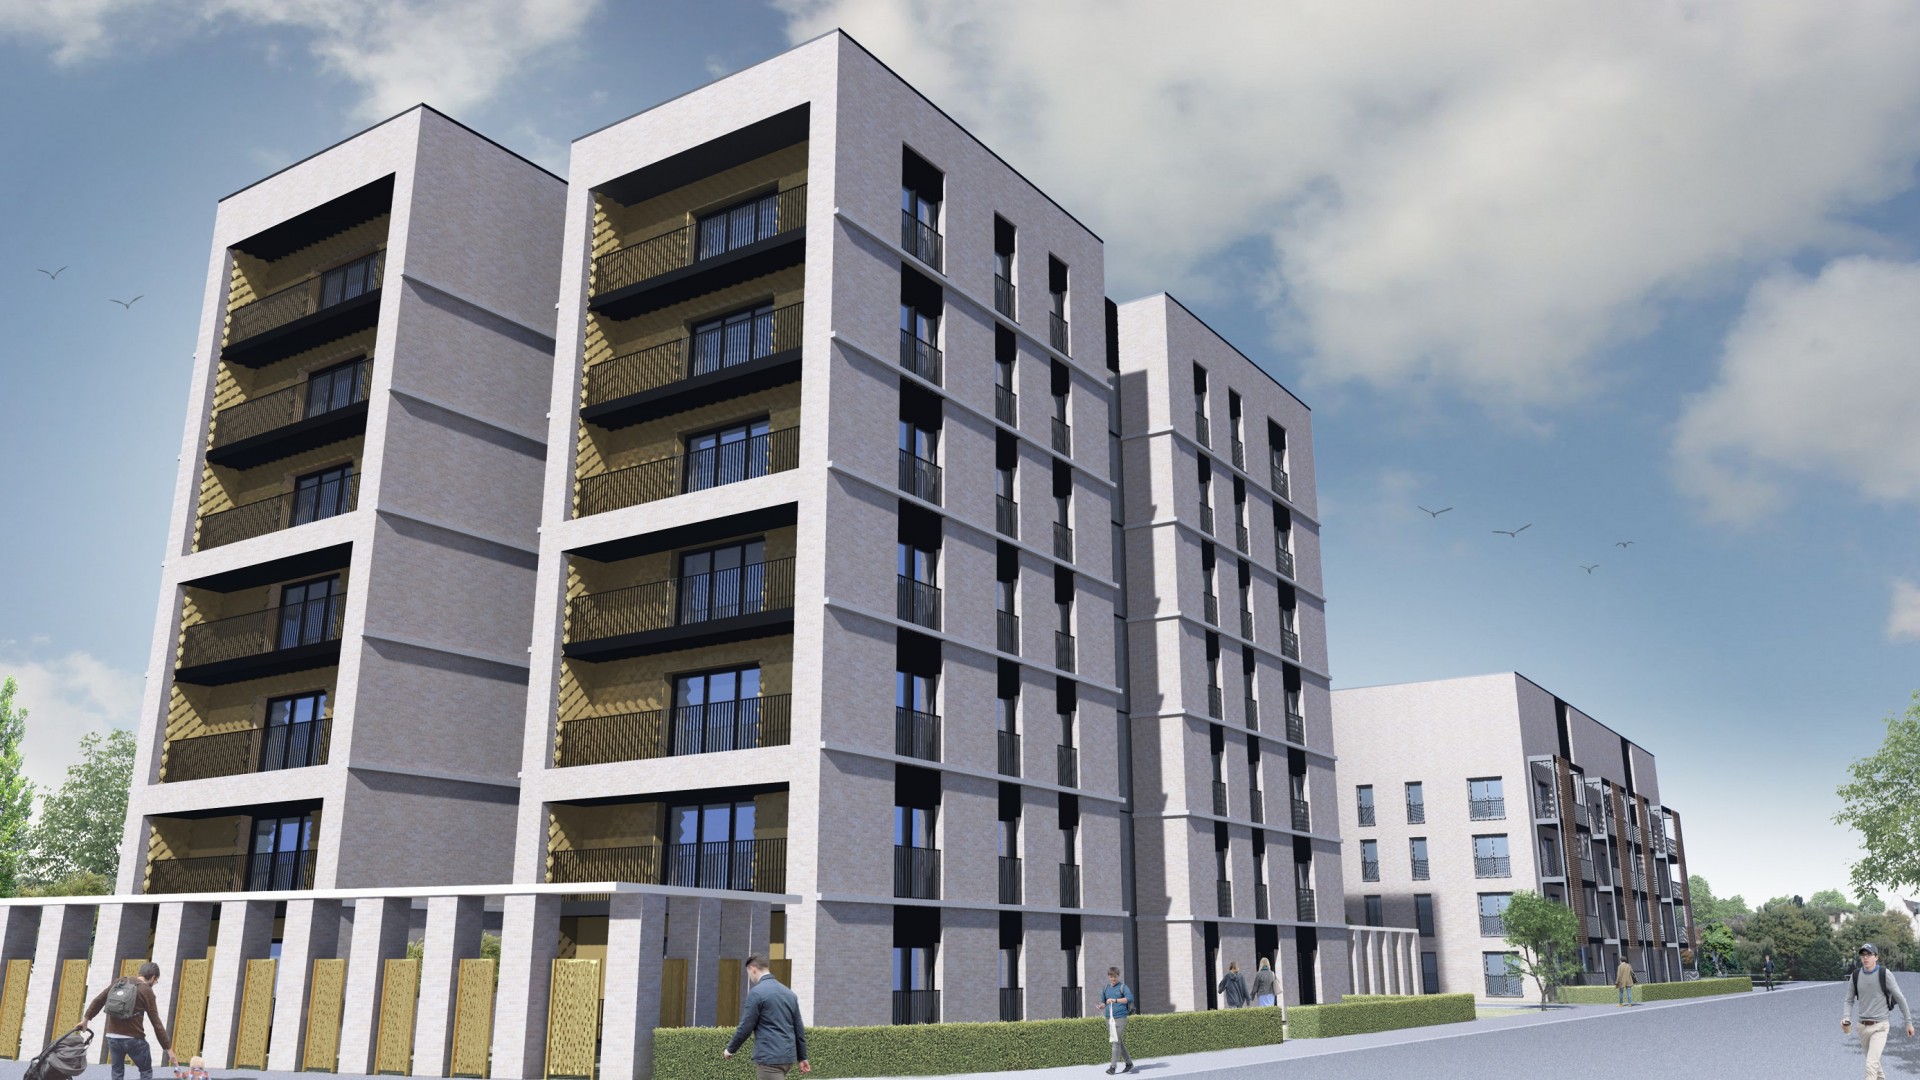 Plans approved for 121 affordable homes on former Glasgow bus depot site